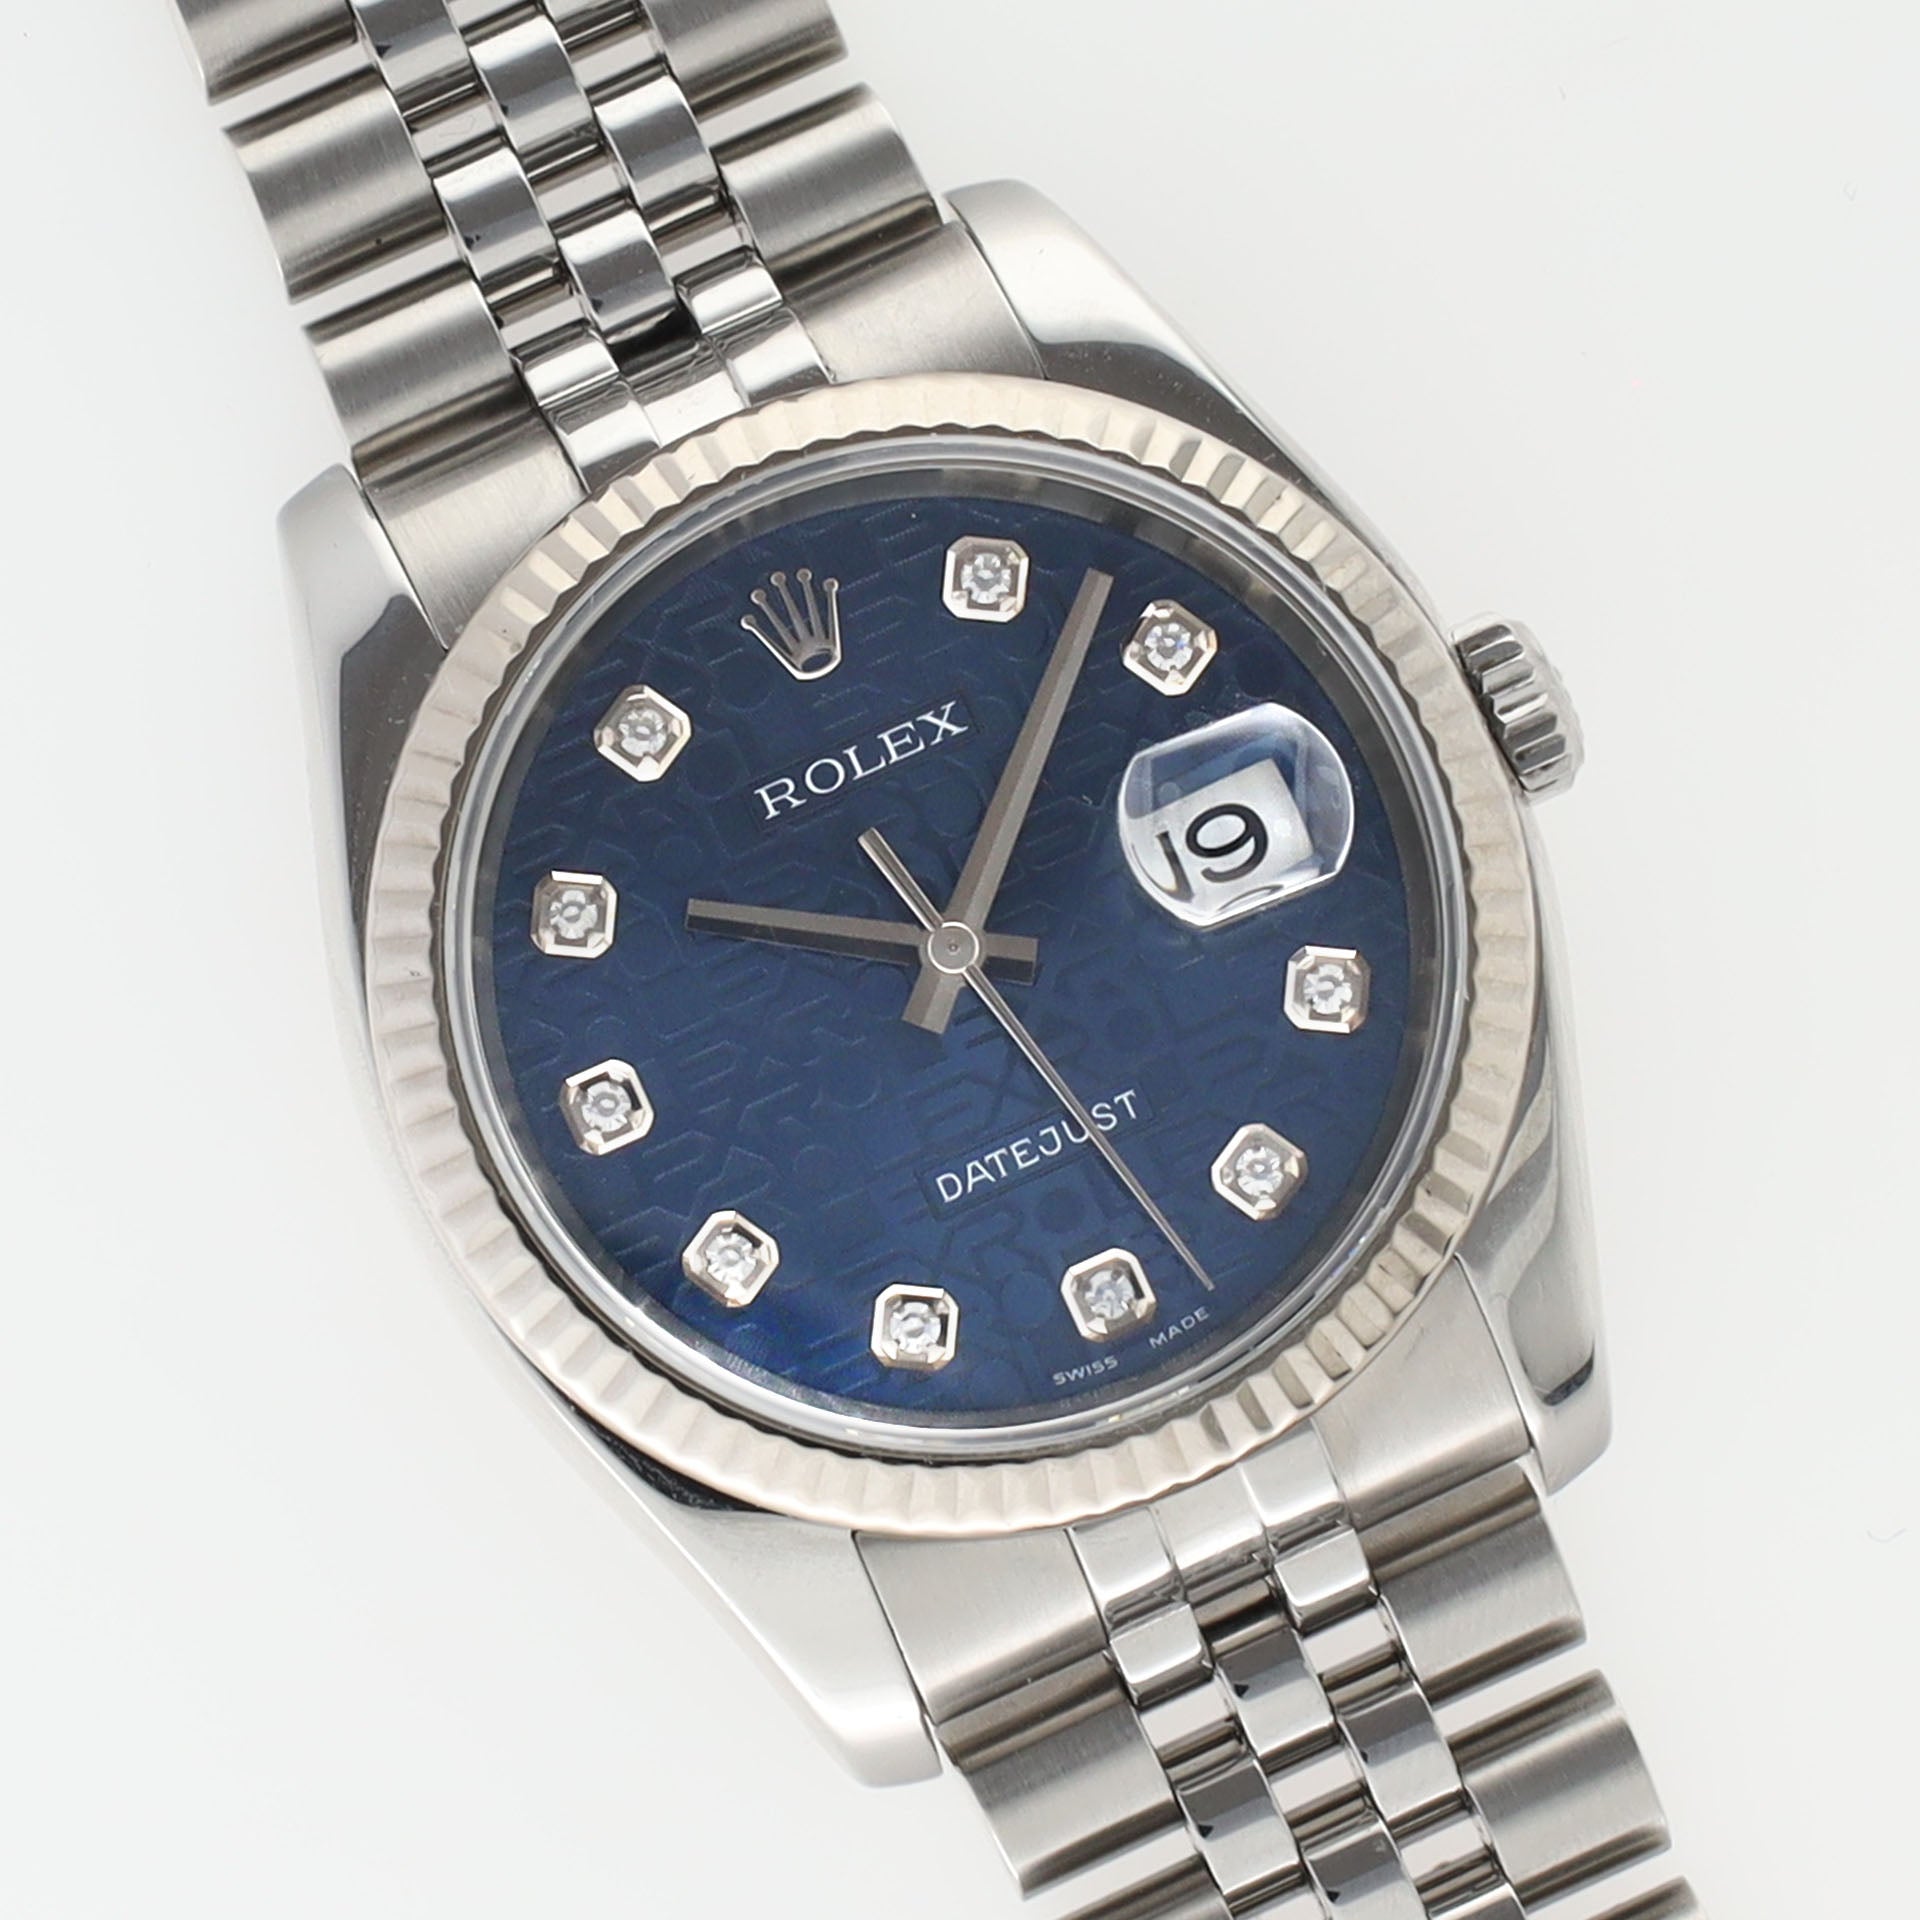 Rolex Datejust 116234 Blue Jubilee Diamond Dial with Papers 